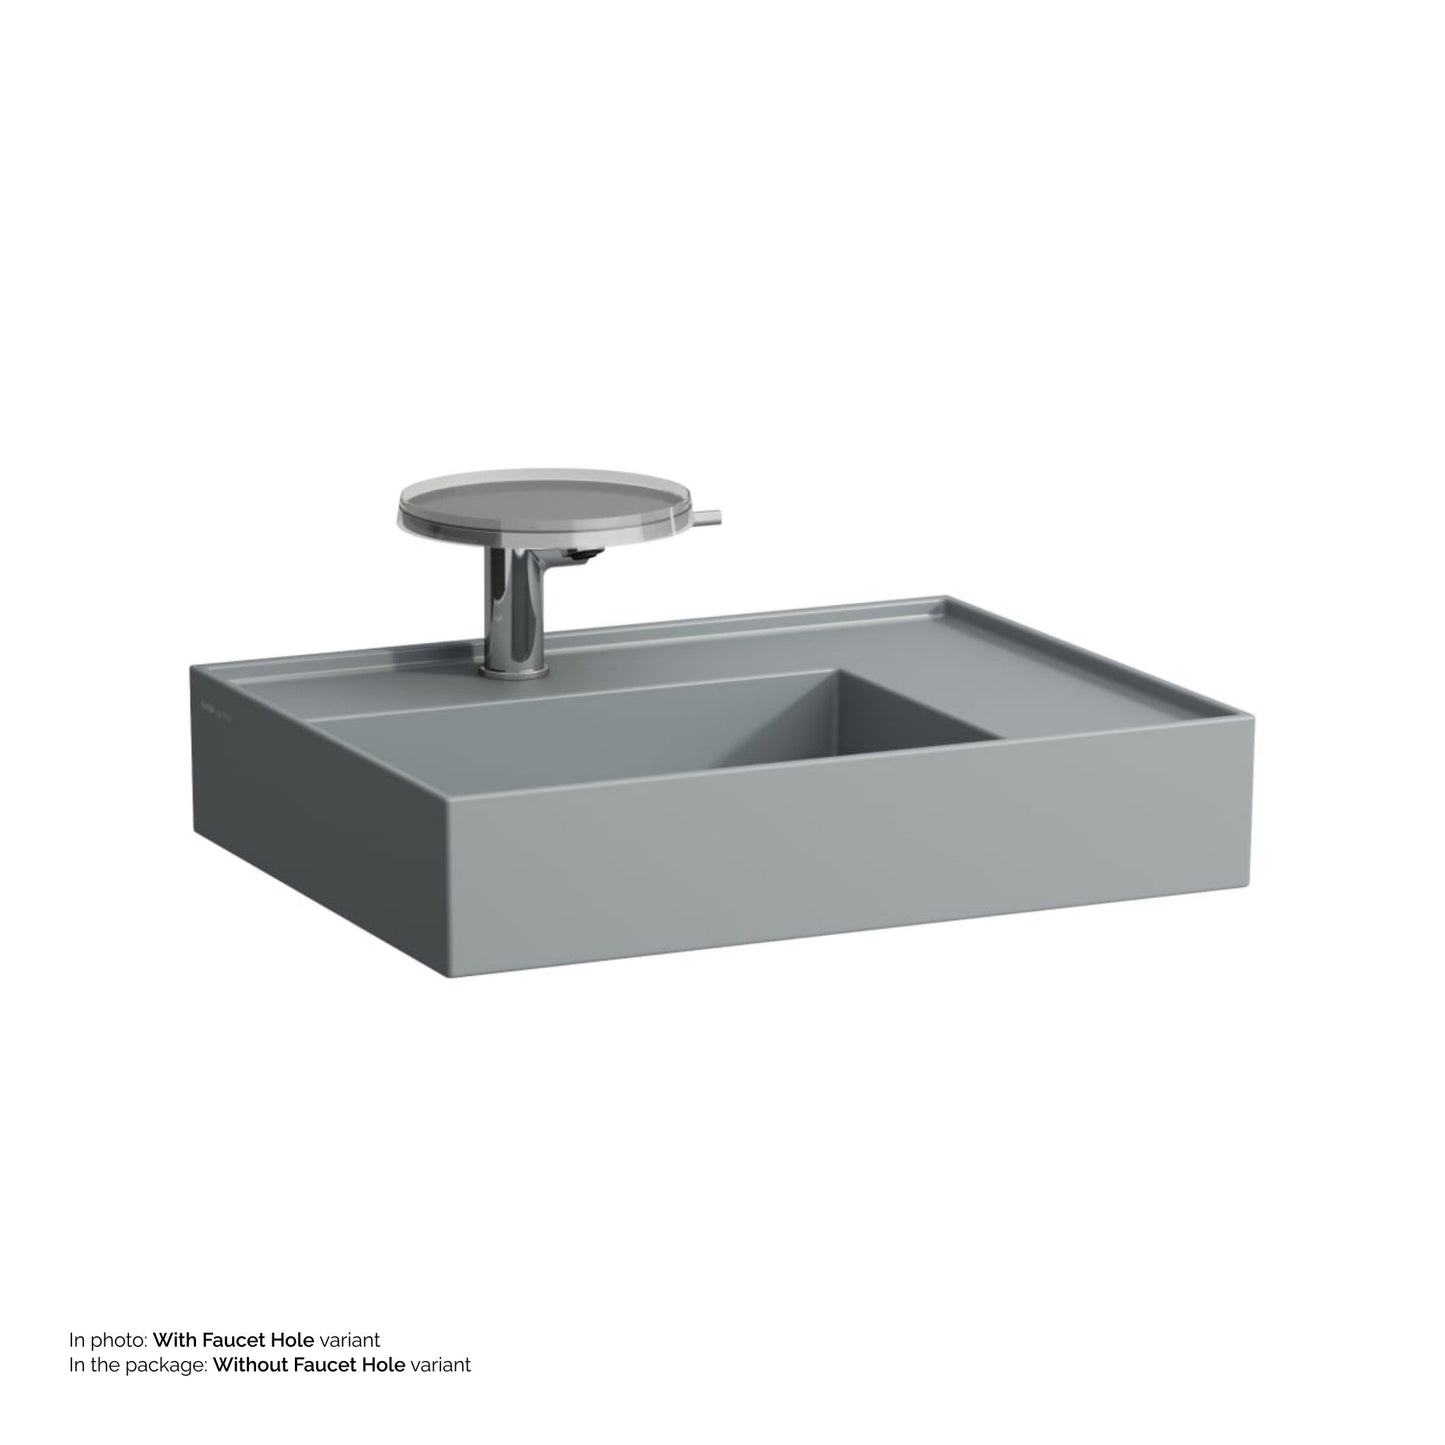 Laufen Kartell 24" x 18" Matte Graphite Countertop Shelf-Right Bathroom Sink Without Faucet Hole